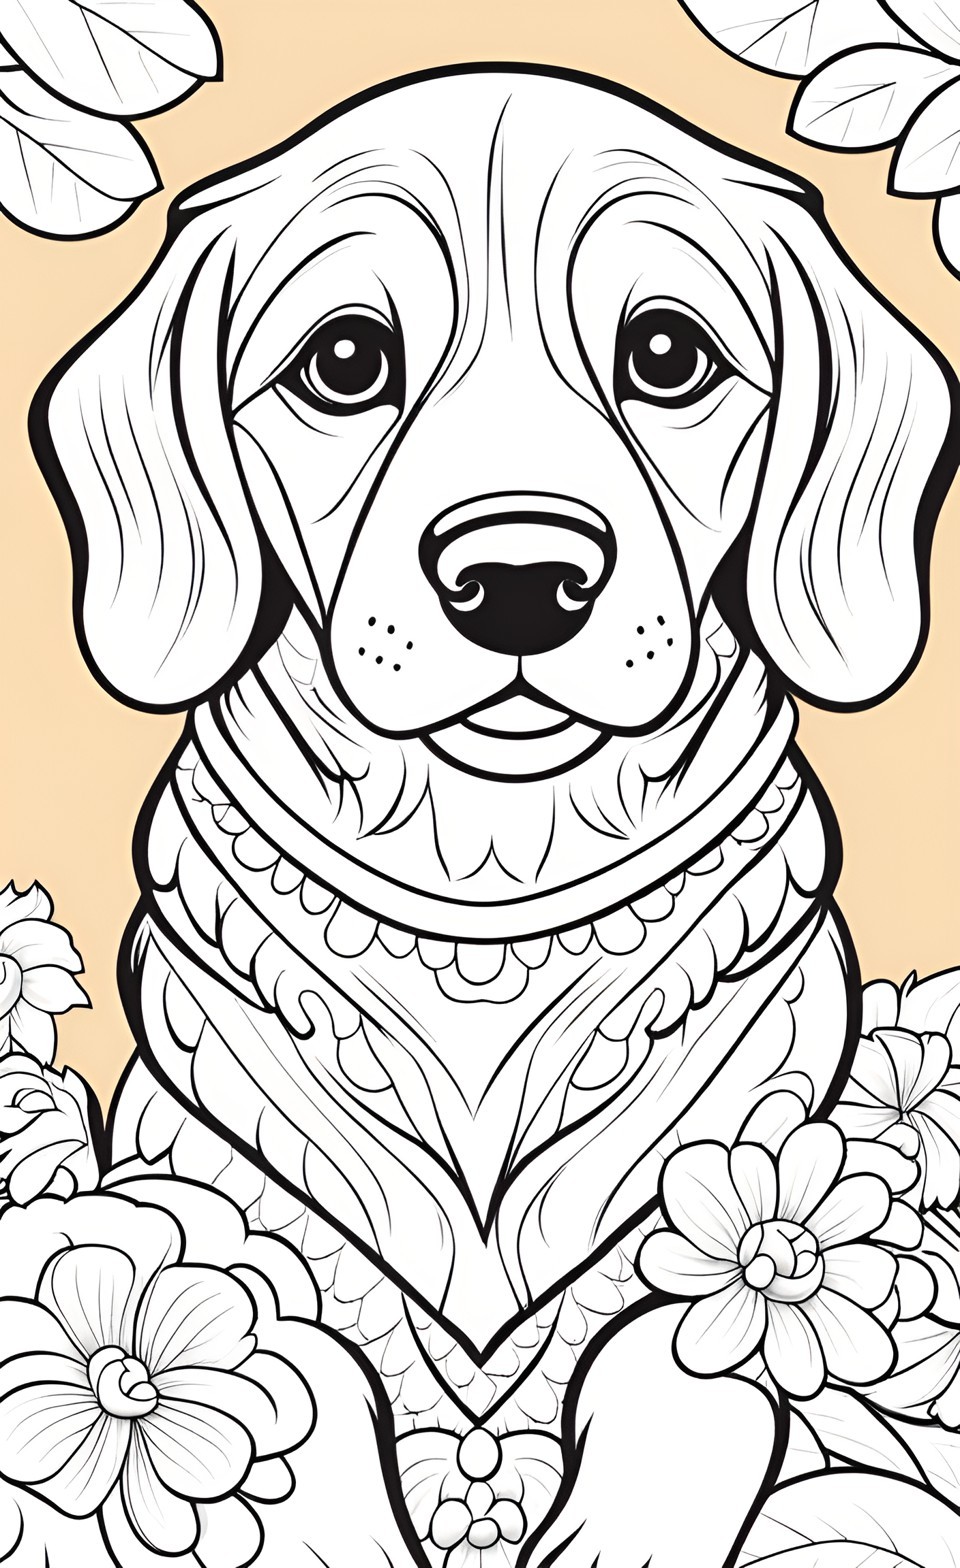 Free Animal Coloring Page #8 | Cute Animals Coloring Pages